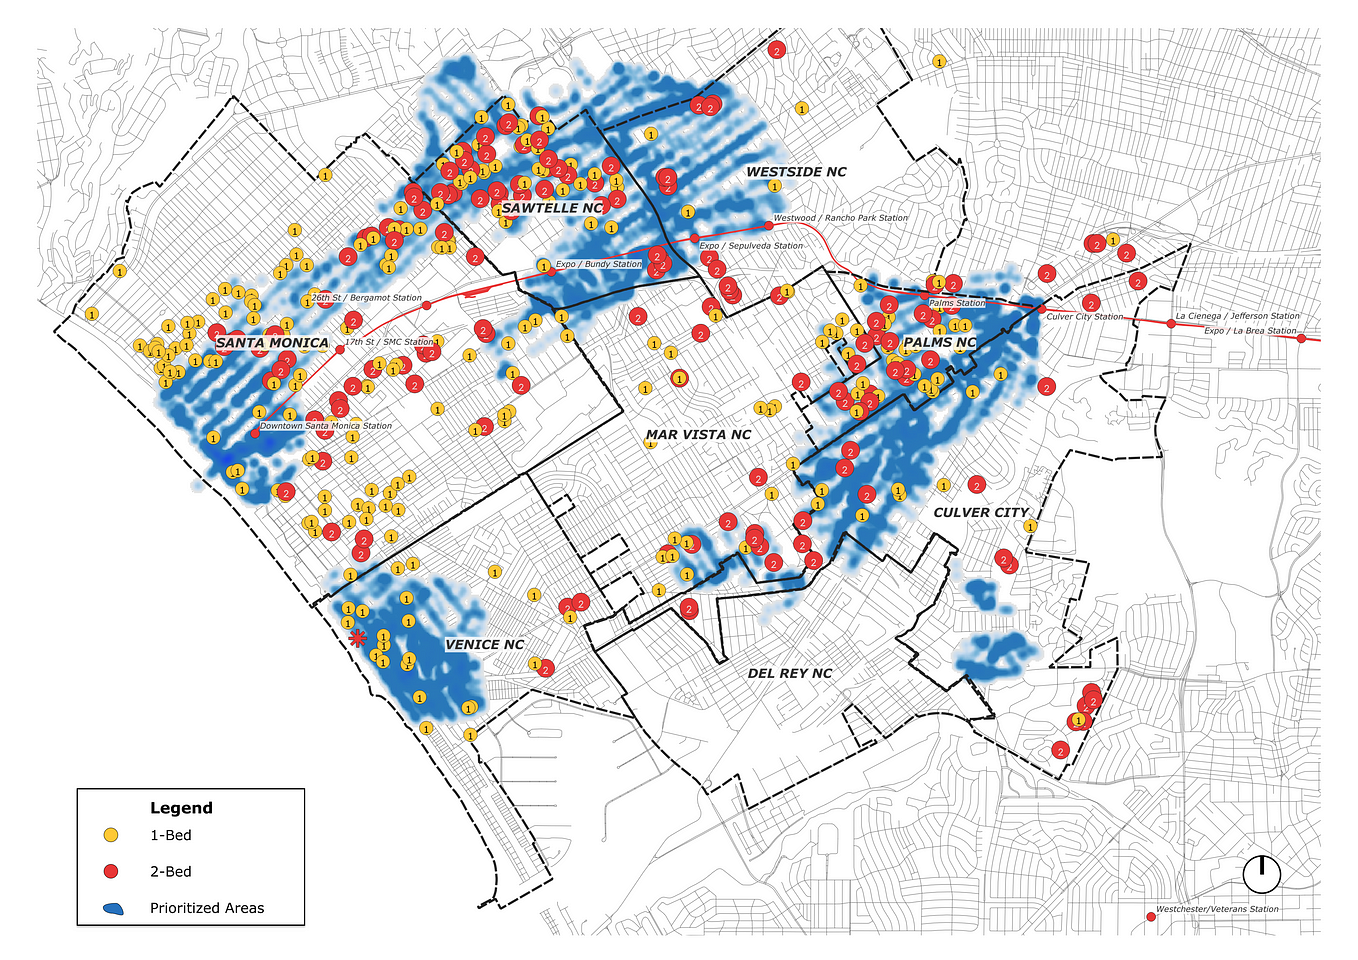 Can I Walk There?— Network Analysis for Los Angeles